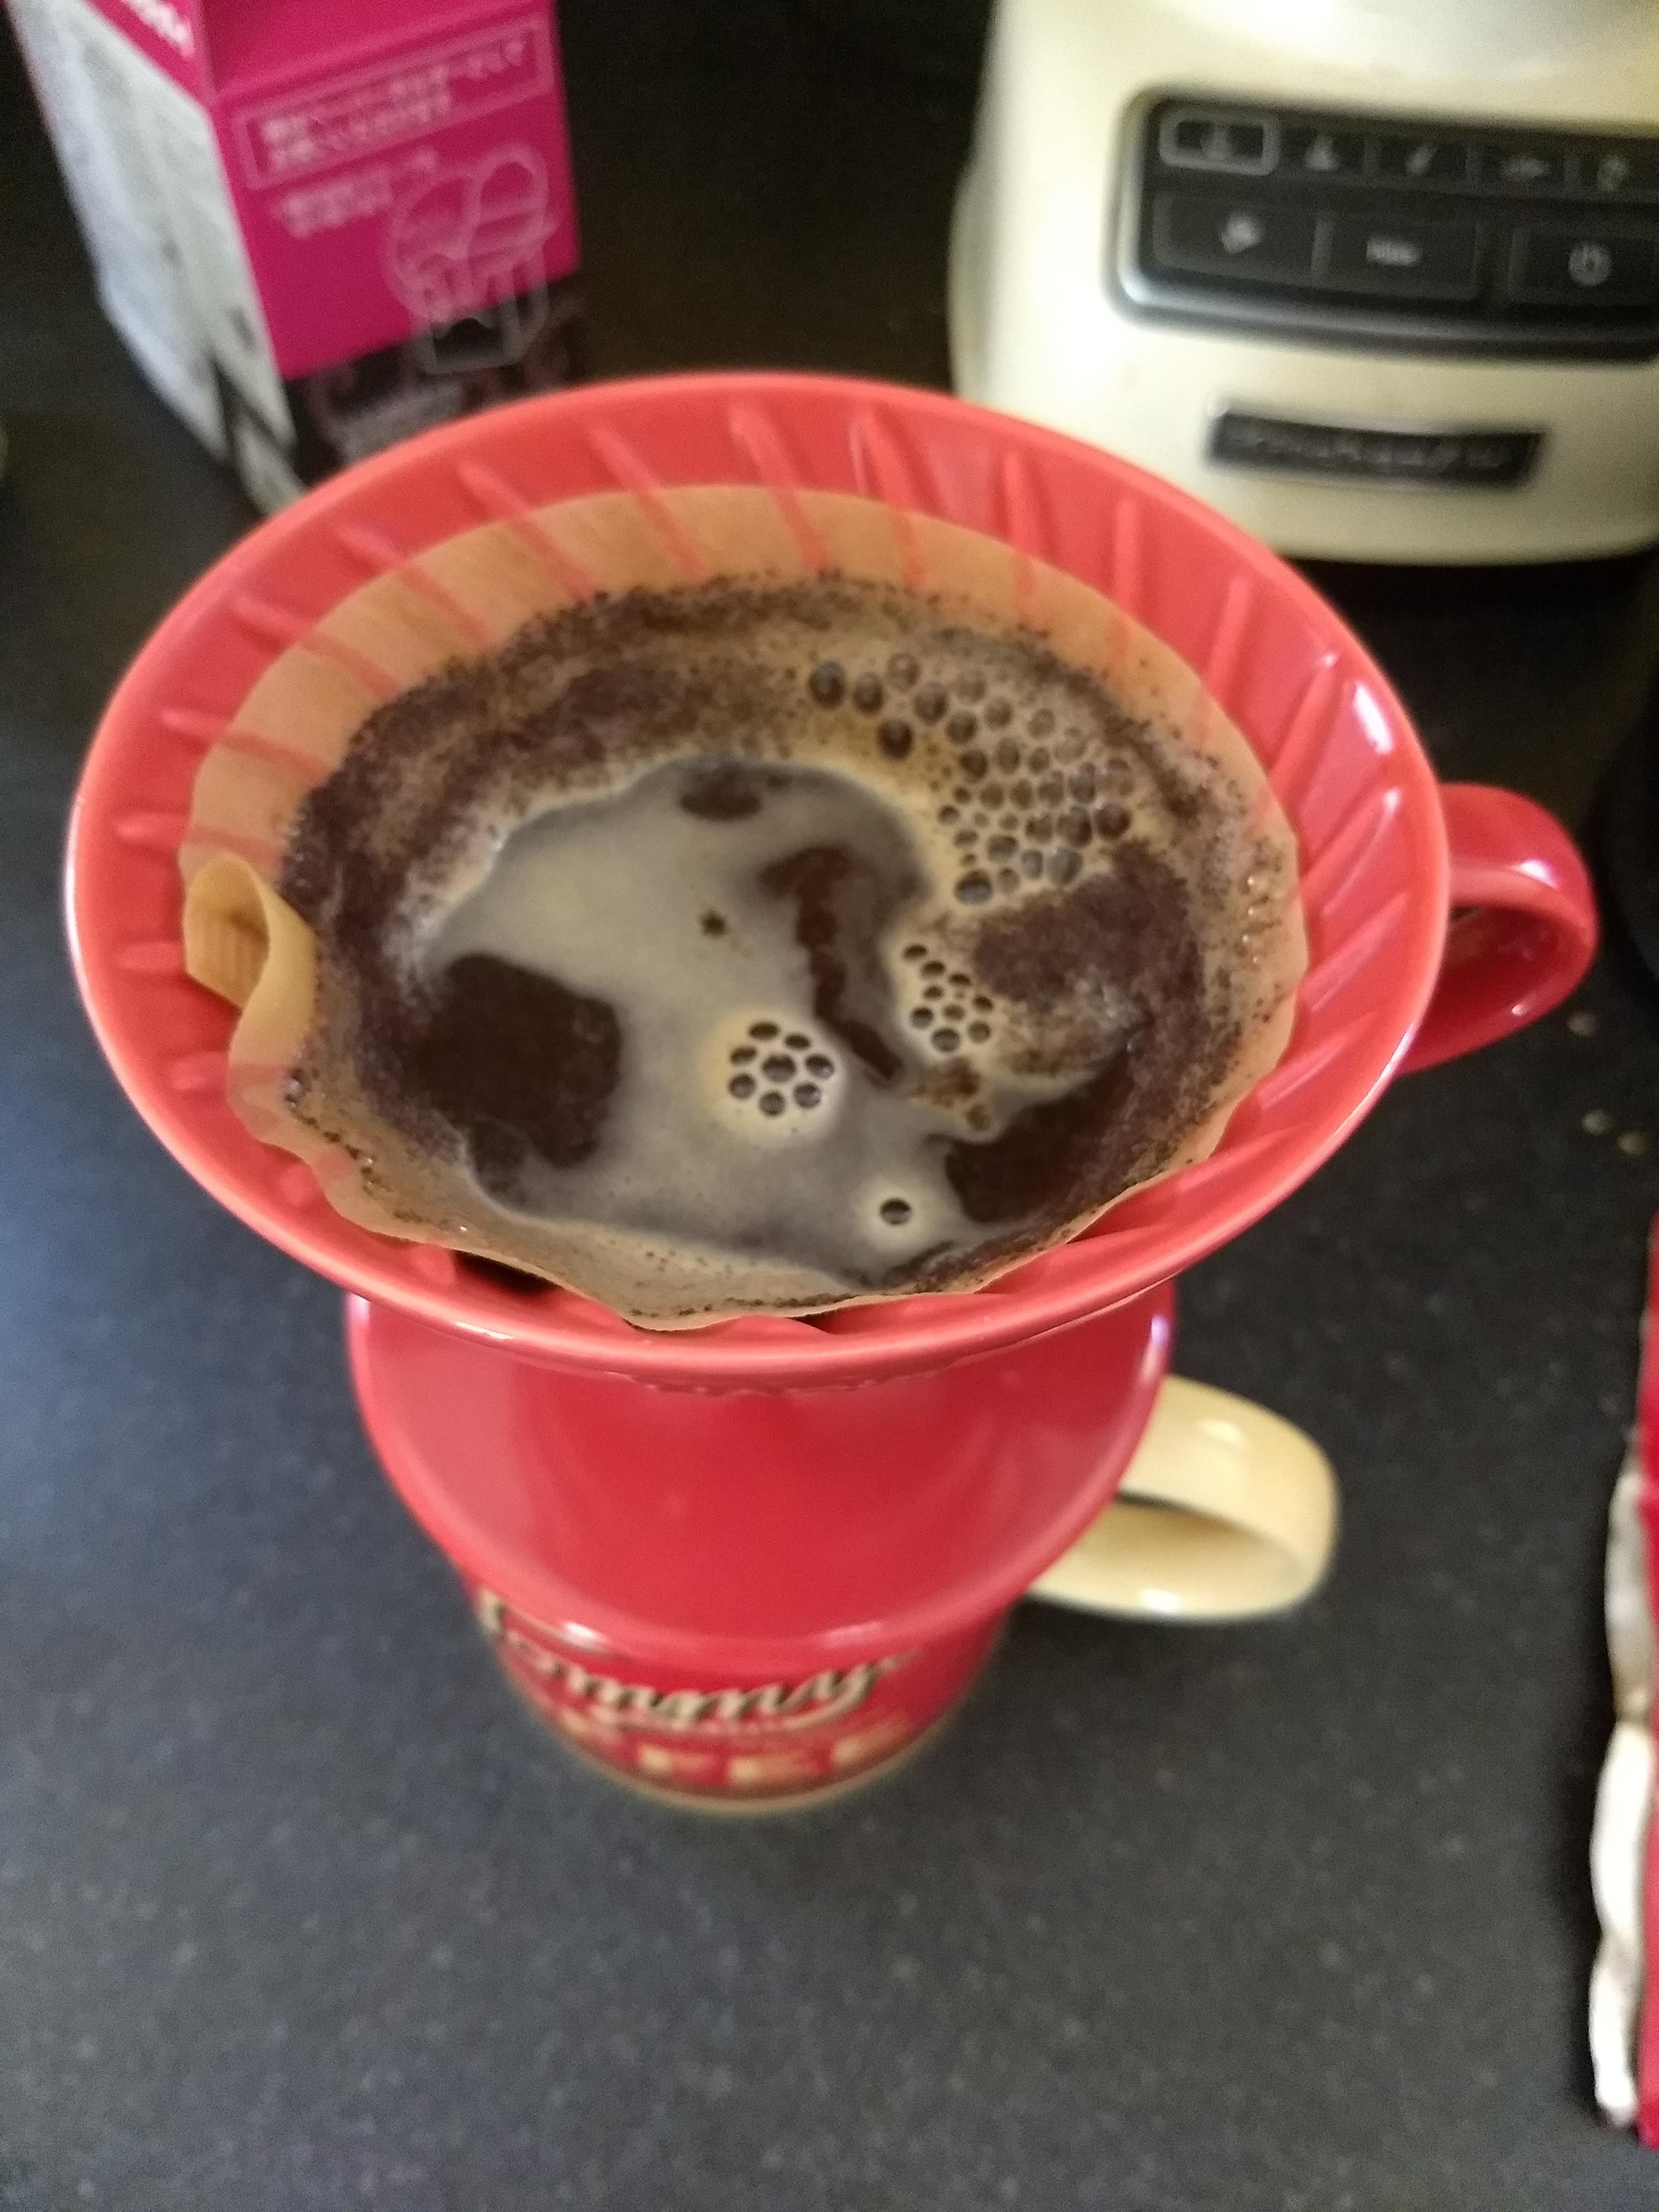 A Hario V60 coffee dripper being used